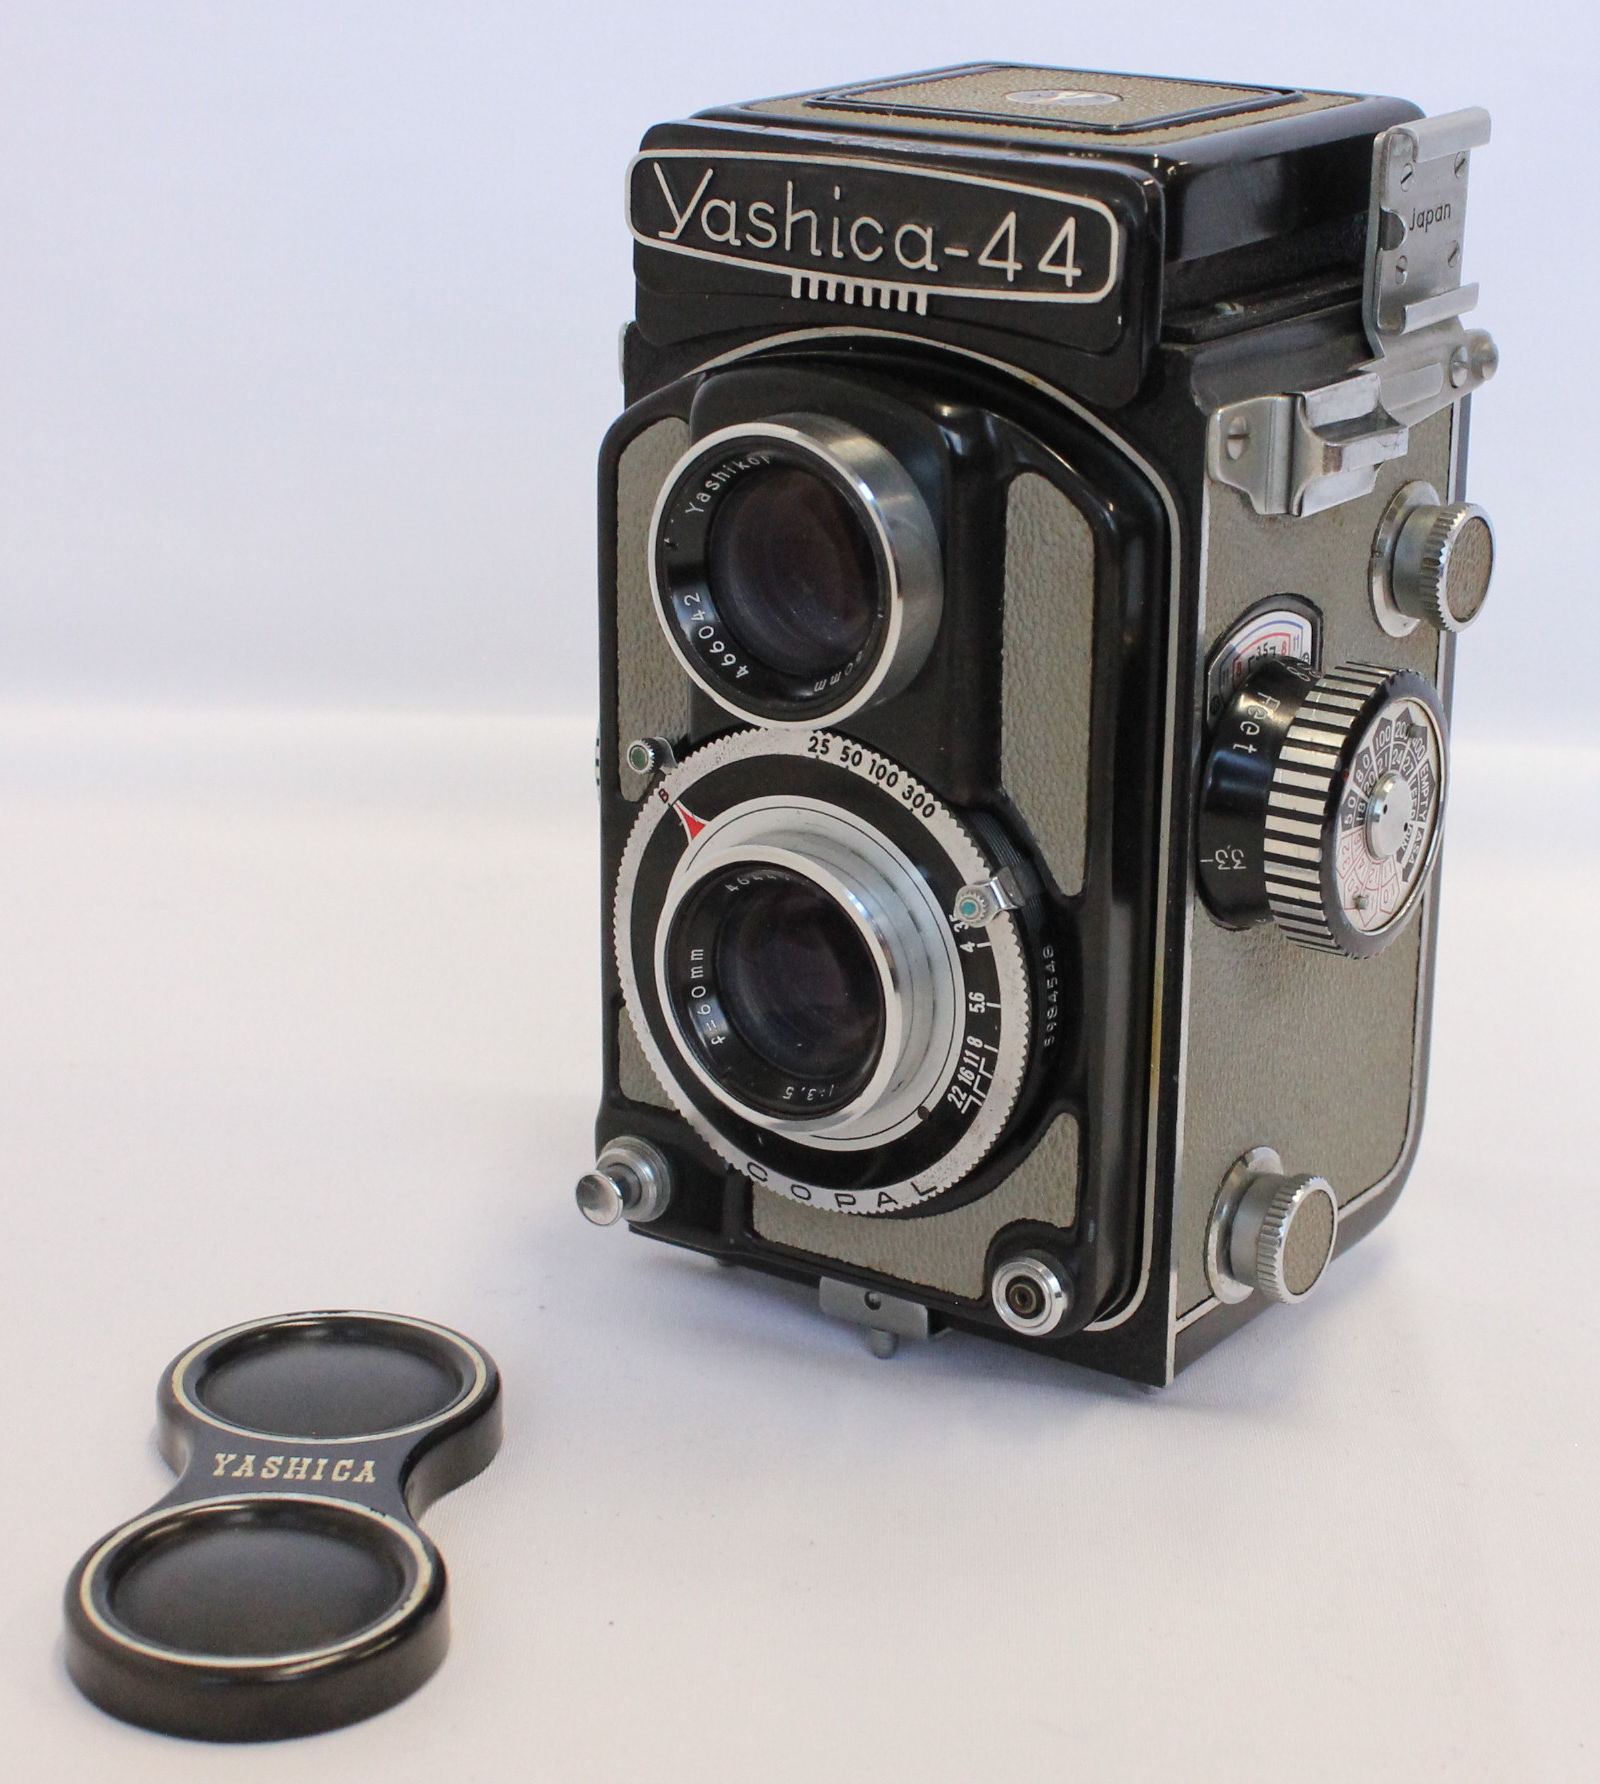 [Excellent++++]  Yashica 44 A 127 4x4 TLR Camera w/ Yashikor 60mm F3.5 Lens from Japan